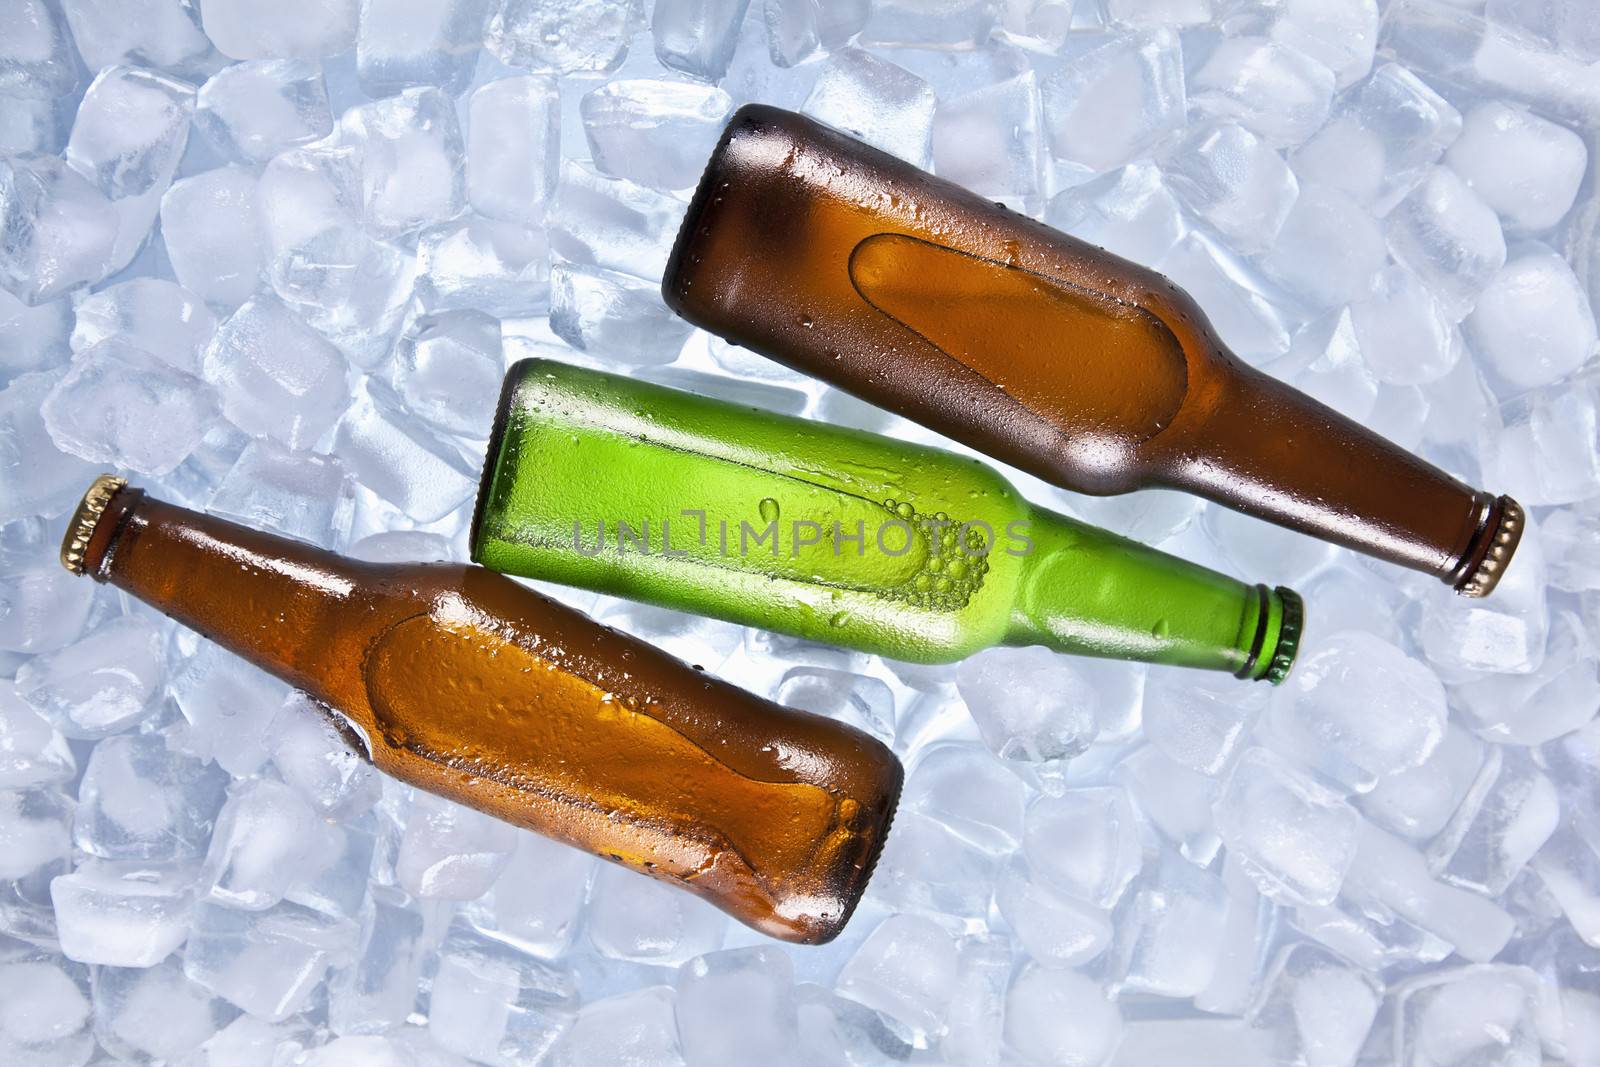 Three bottles of beer cooling on ice.